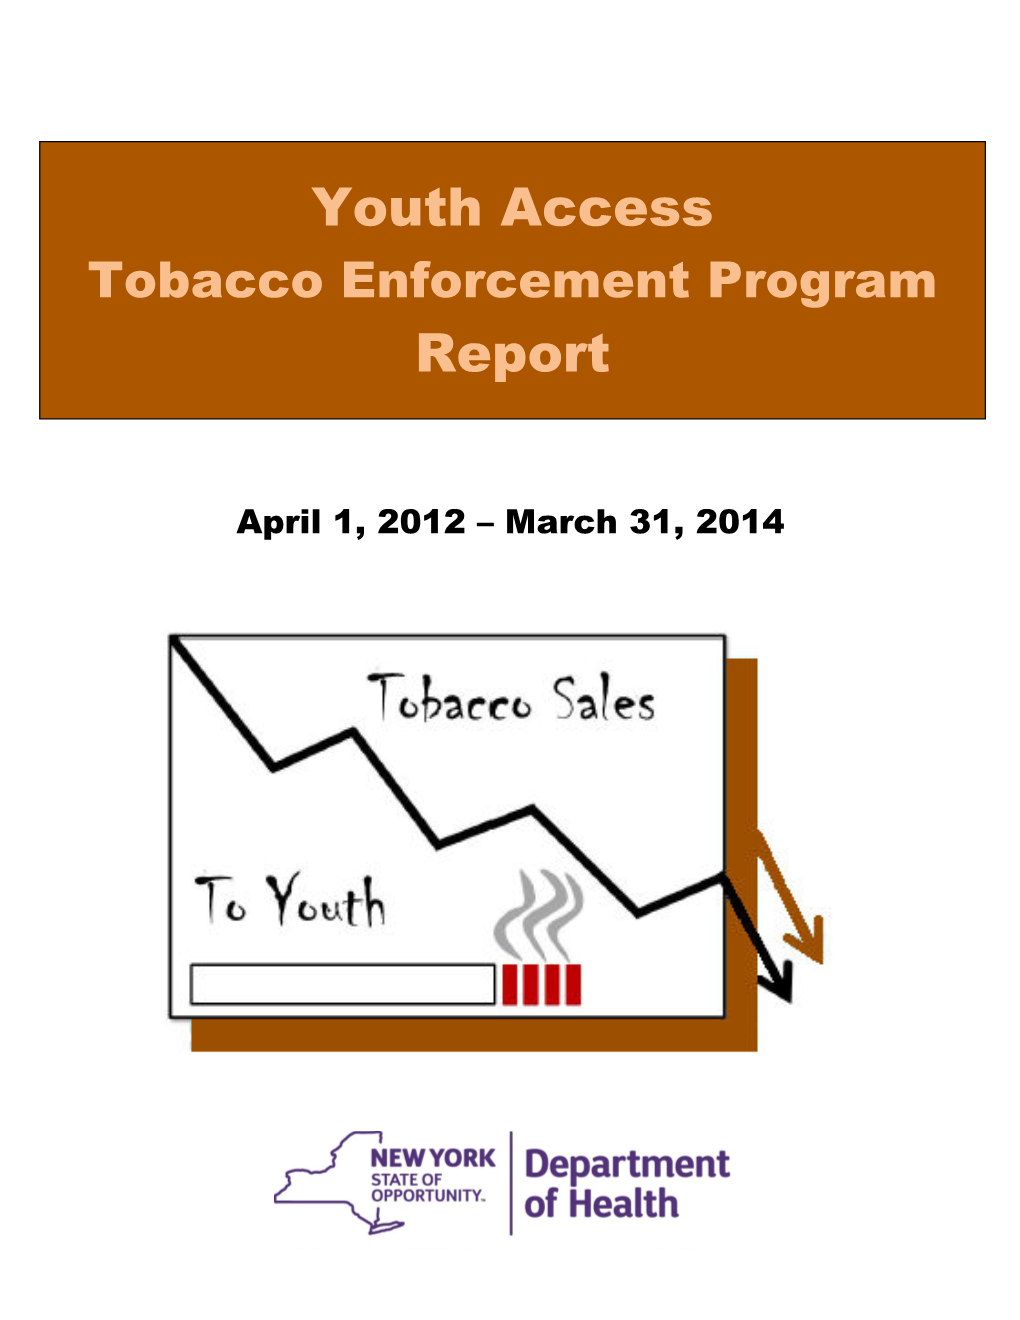 Youth Access Tobacco Enforcement Program Report 2012-2014